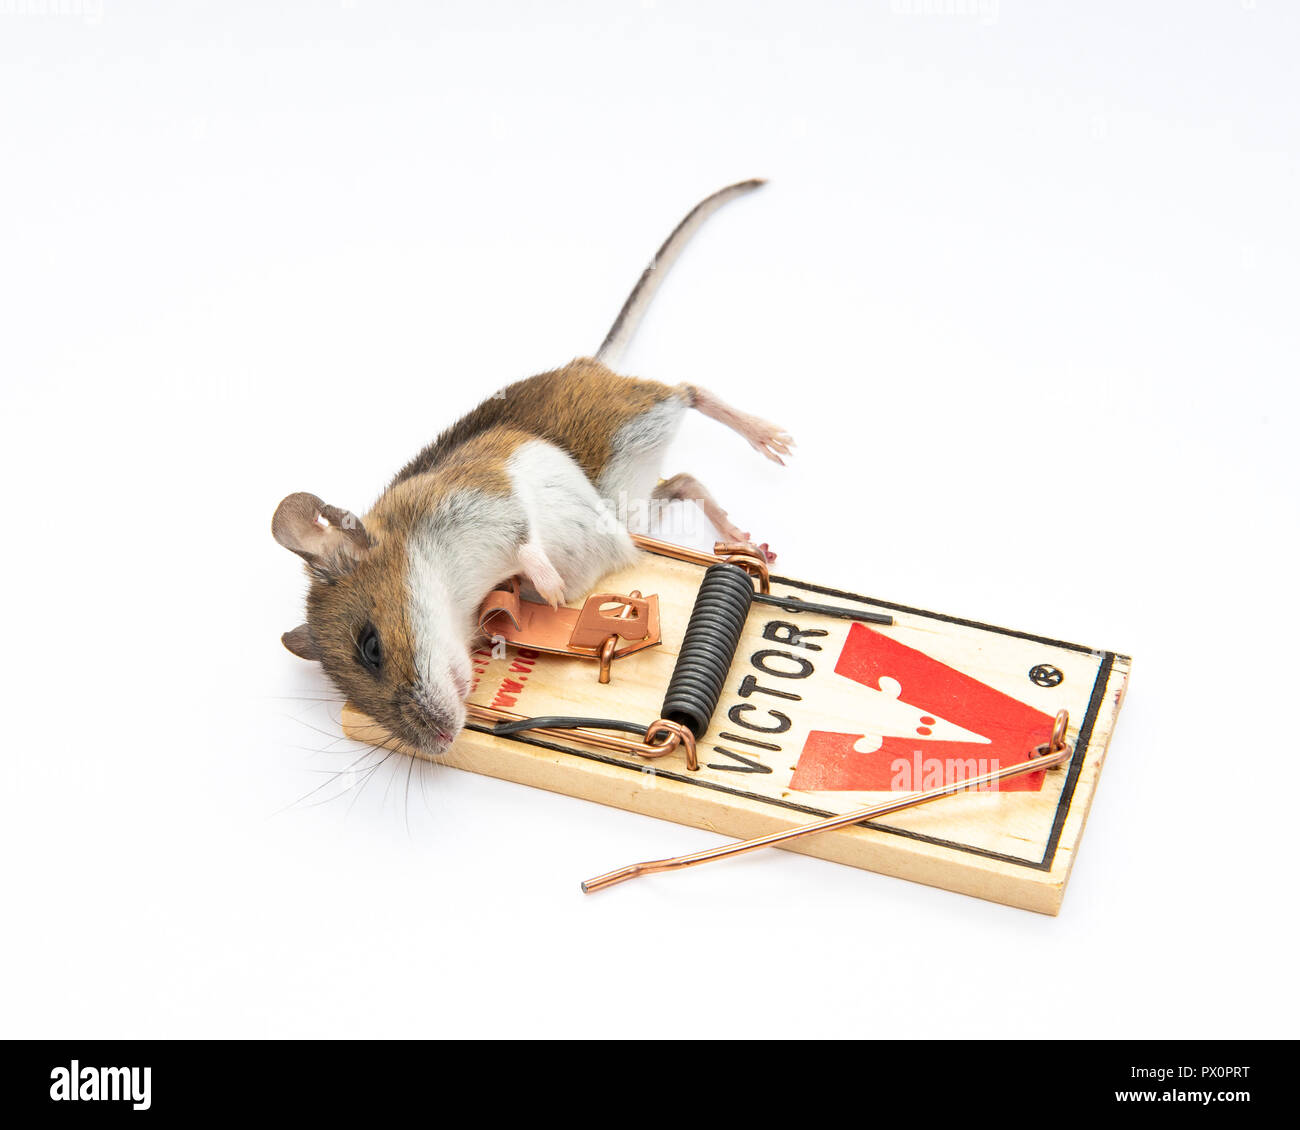 How to catch mice with a pop can and a coat hanger. DIY Mousetrap. Mousetrap  Monday 